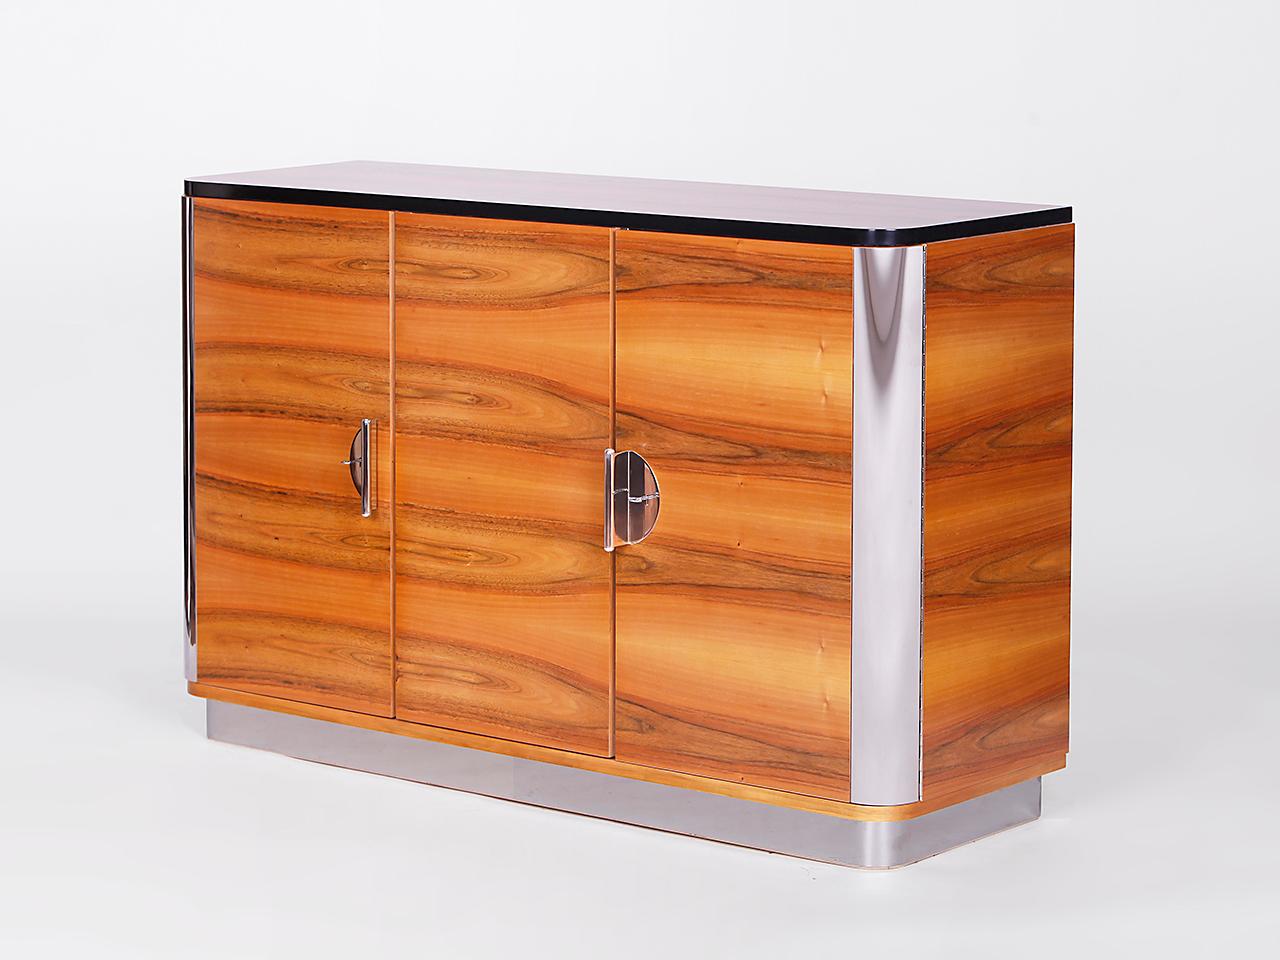 This sideboard was produced by Tschechisches Wohndesign Manufaktur in the style of Czech Functionalism of the 1920s/30s. The surface is veneered with a unique light walnut, the metal applications are made of polished stainless steel. You like the